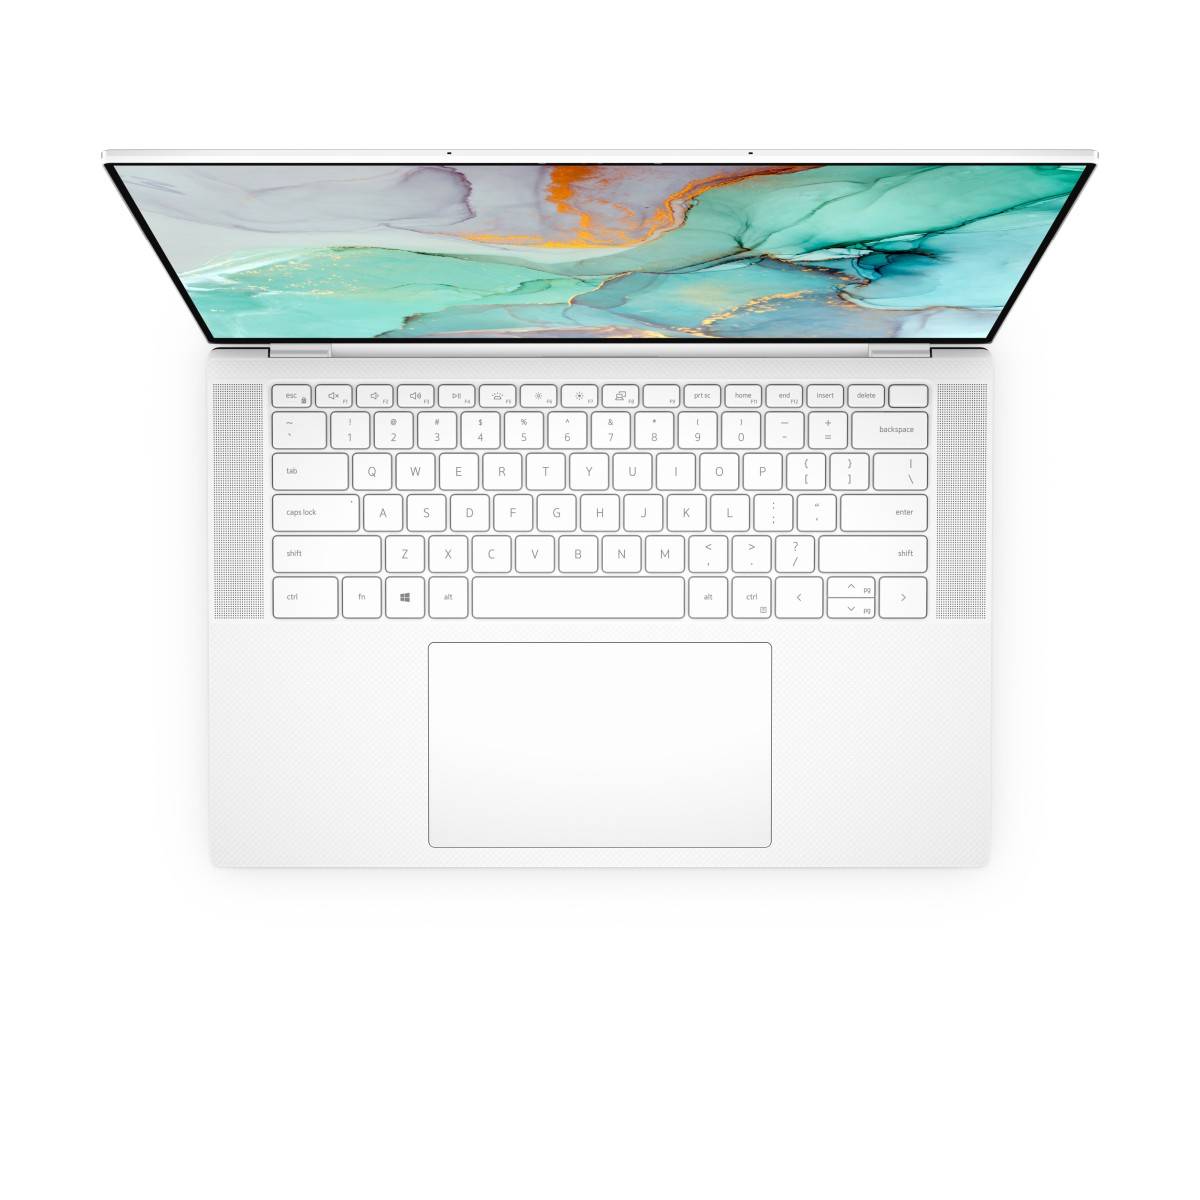 Dell XPS 15 top down in white